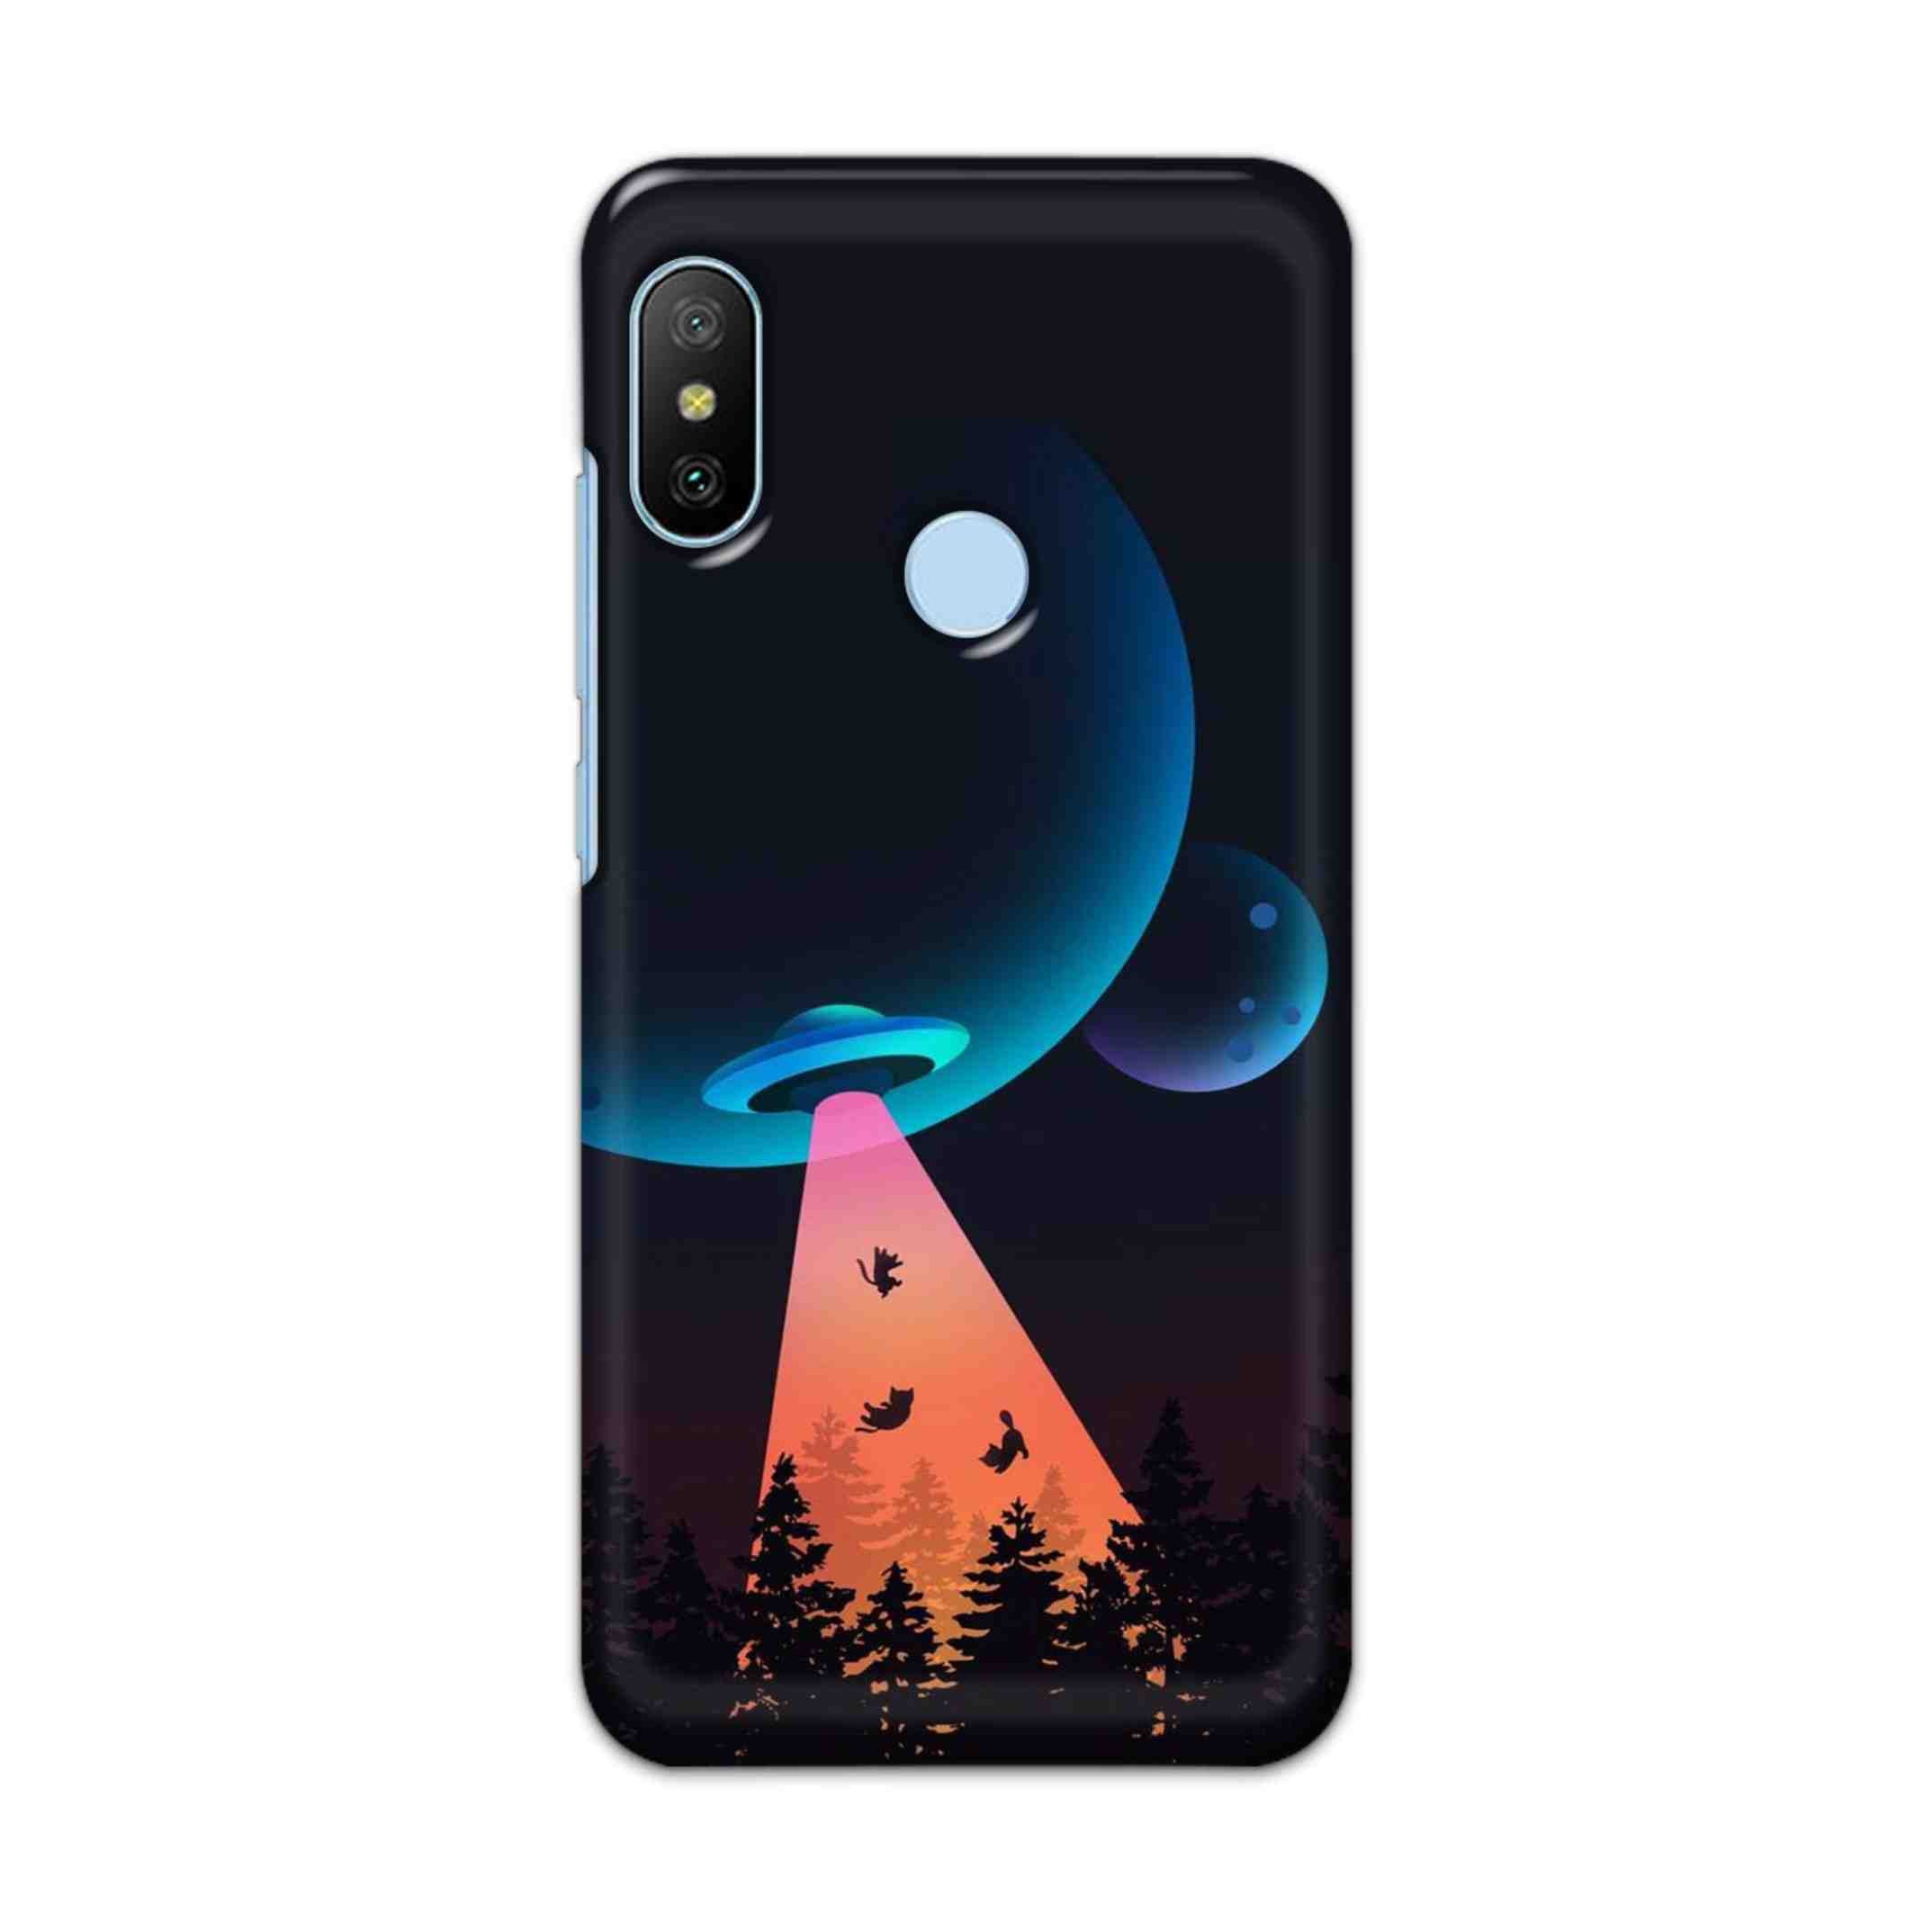 Buy Spaceship Hard Back Mobile Phone Case/Cover For Xiaomi Redmi 6 Pro Online